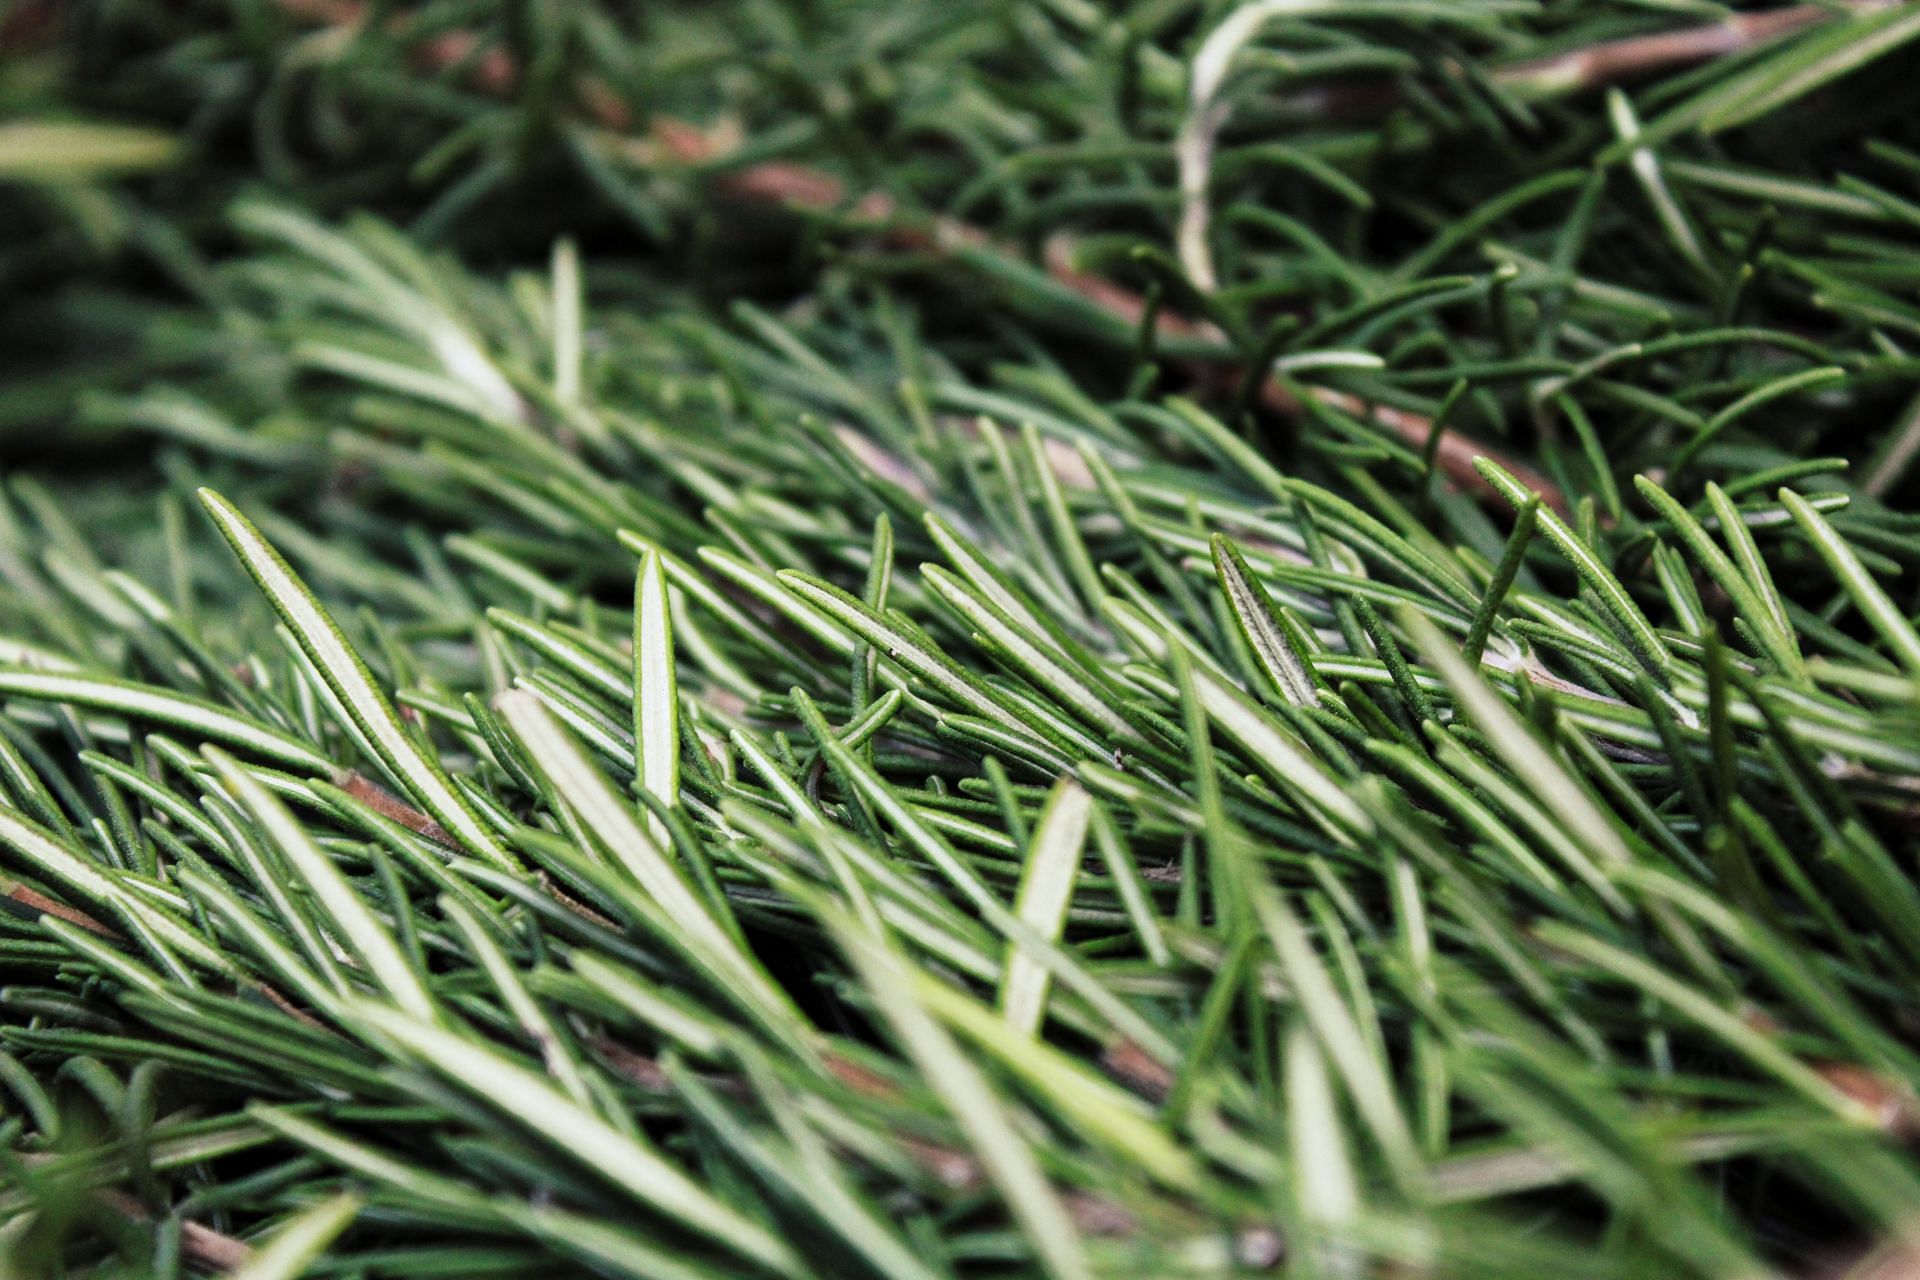 Rosemary oil for hair growth: Does it work? (Image via Unsplash / Fulvio Ciccolo)